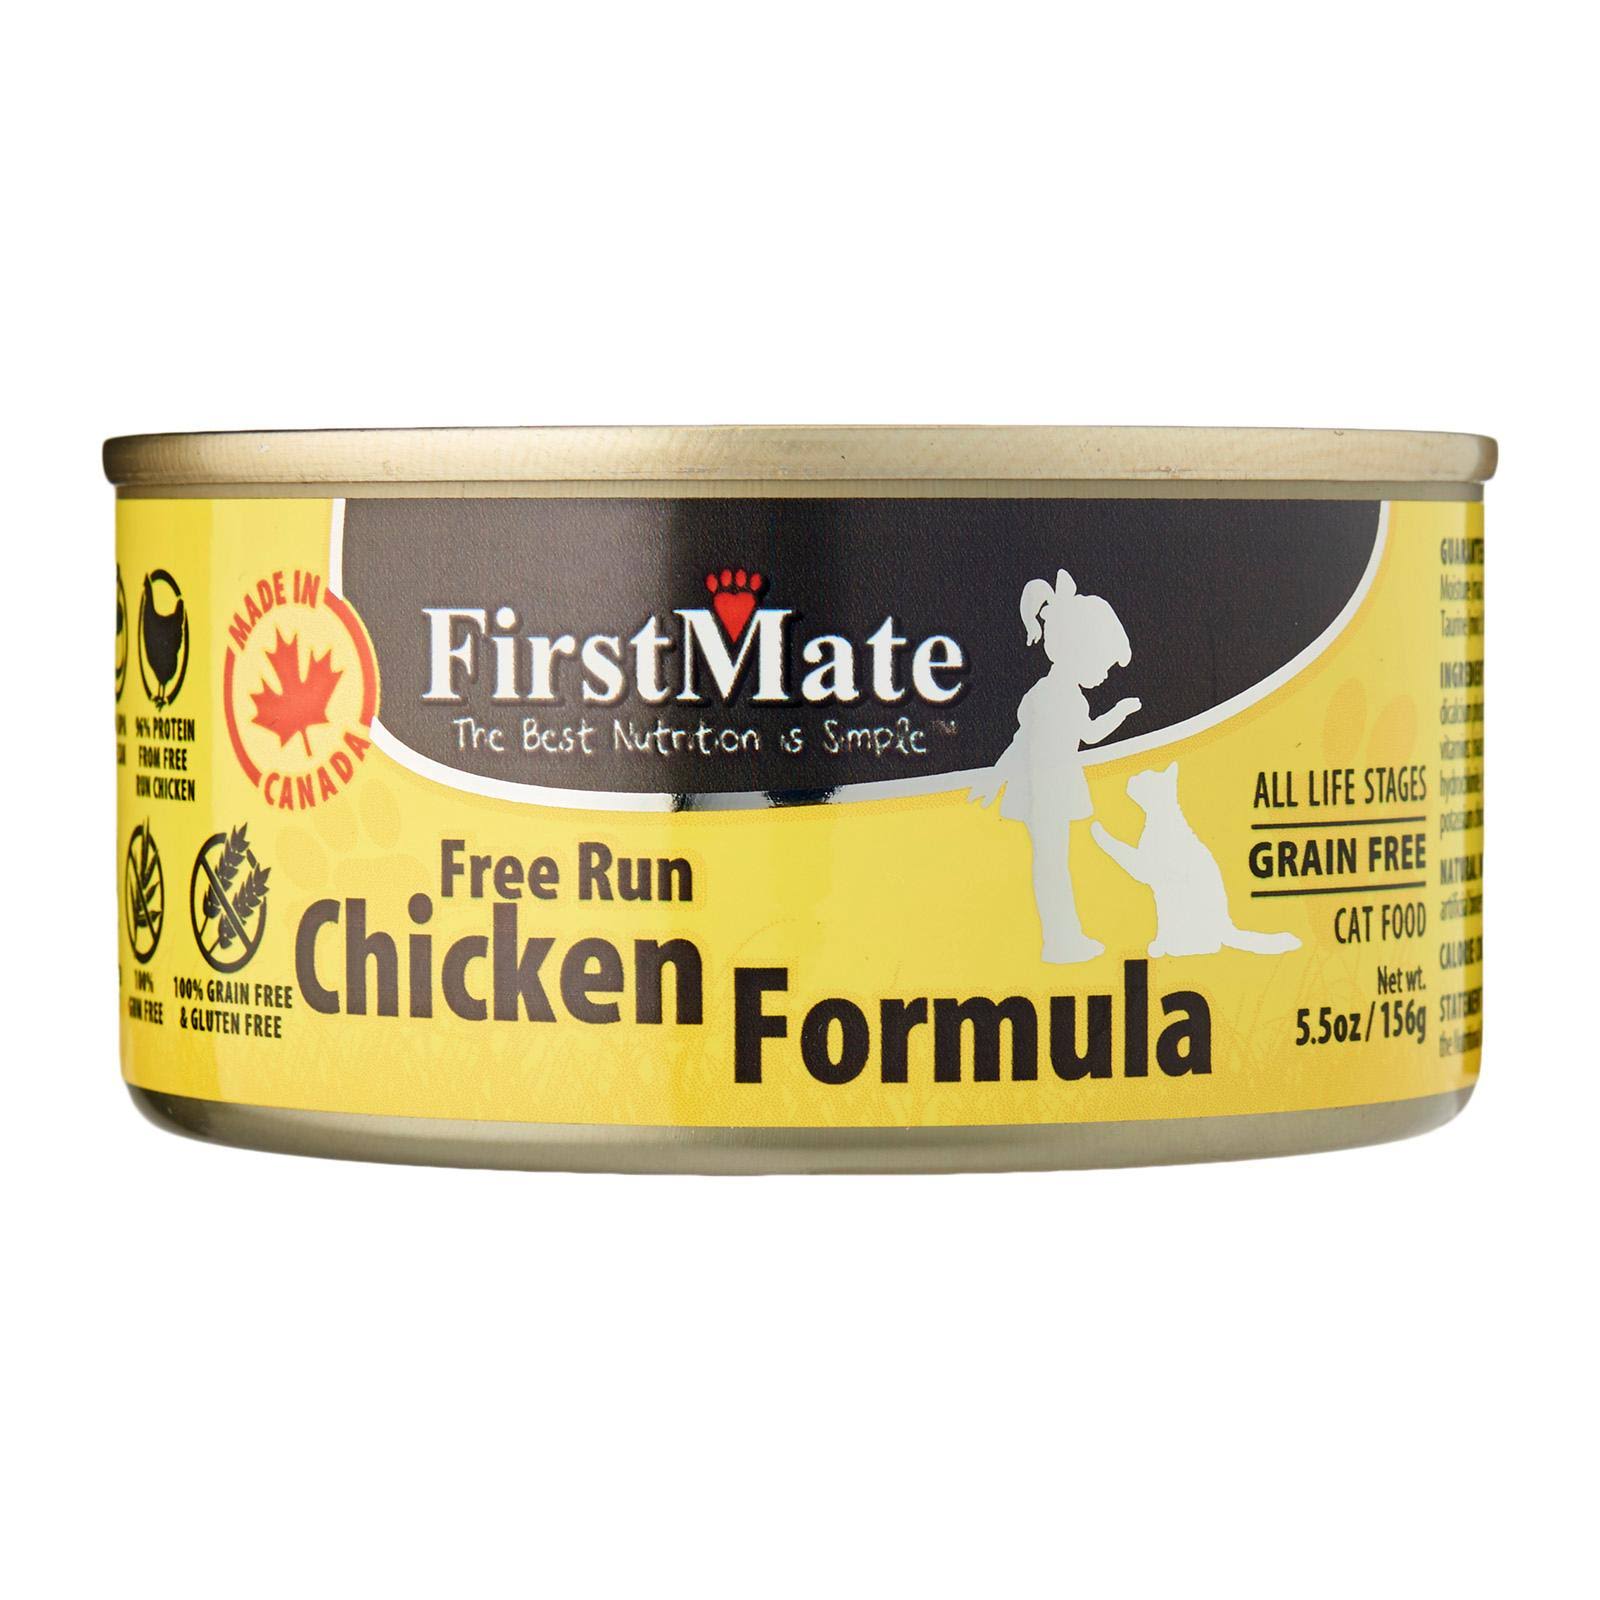 FirstMate Chicken Limited Ingredient Grain-Free Canned Cat Food, 5.5-oz